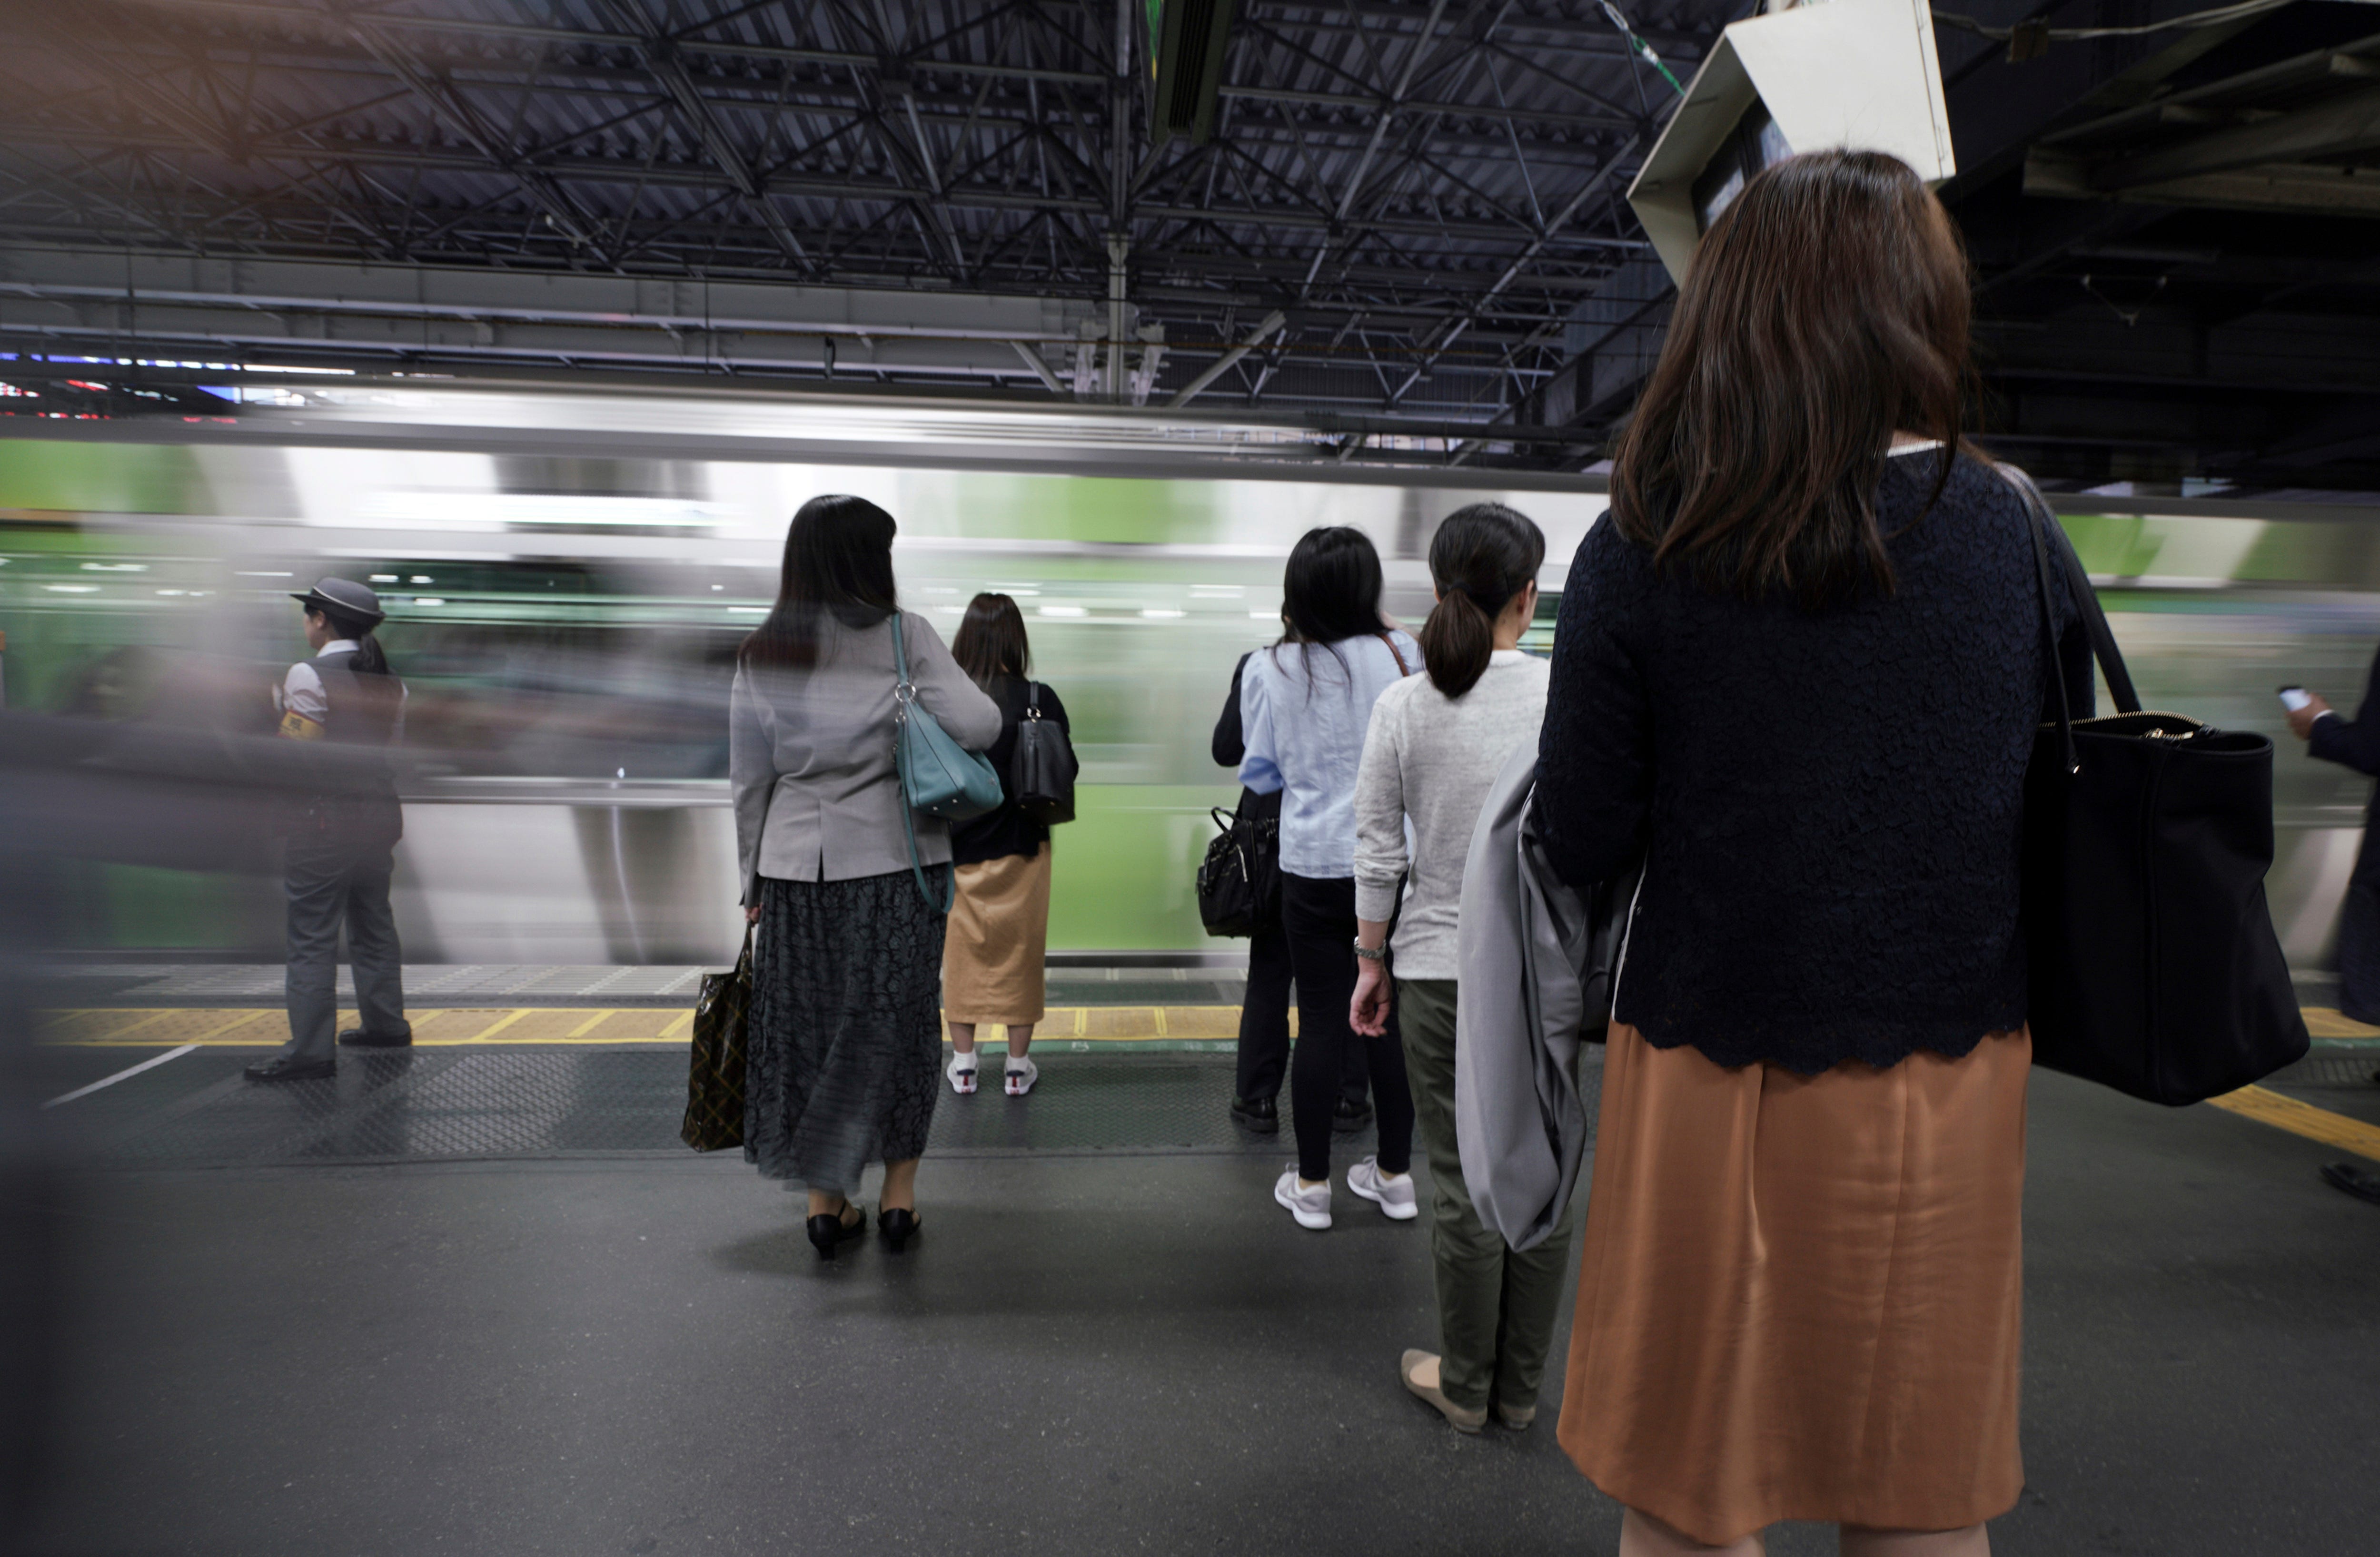 A police-developed smartphone app with anti-sex crime alarms has won massive subscriptions as Japanese women try to arm themselves against gropers on packed rush-hour trains.